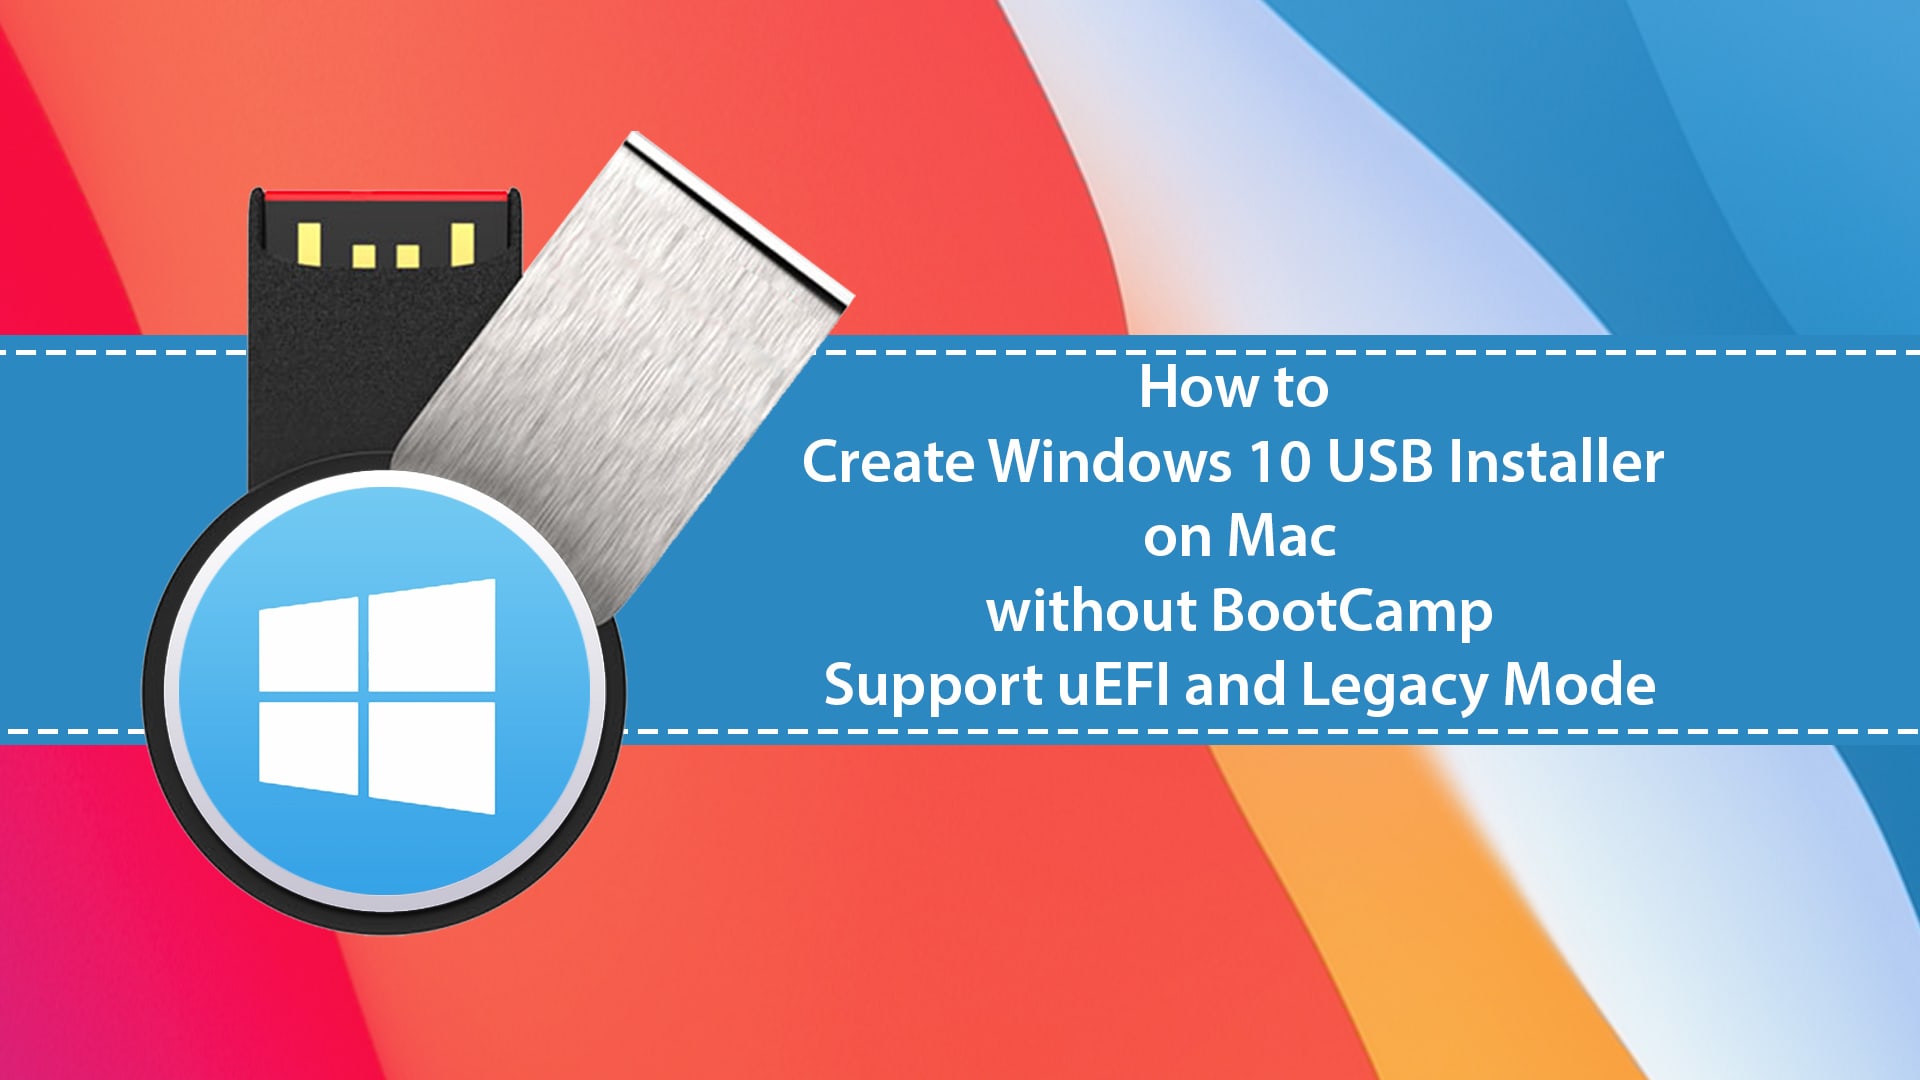 creating windows 10 image for installation to mac